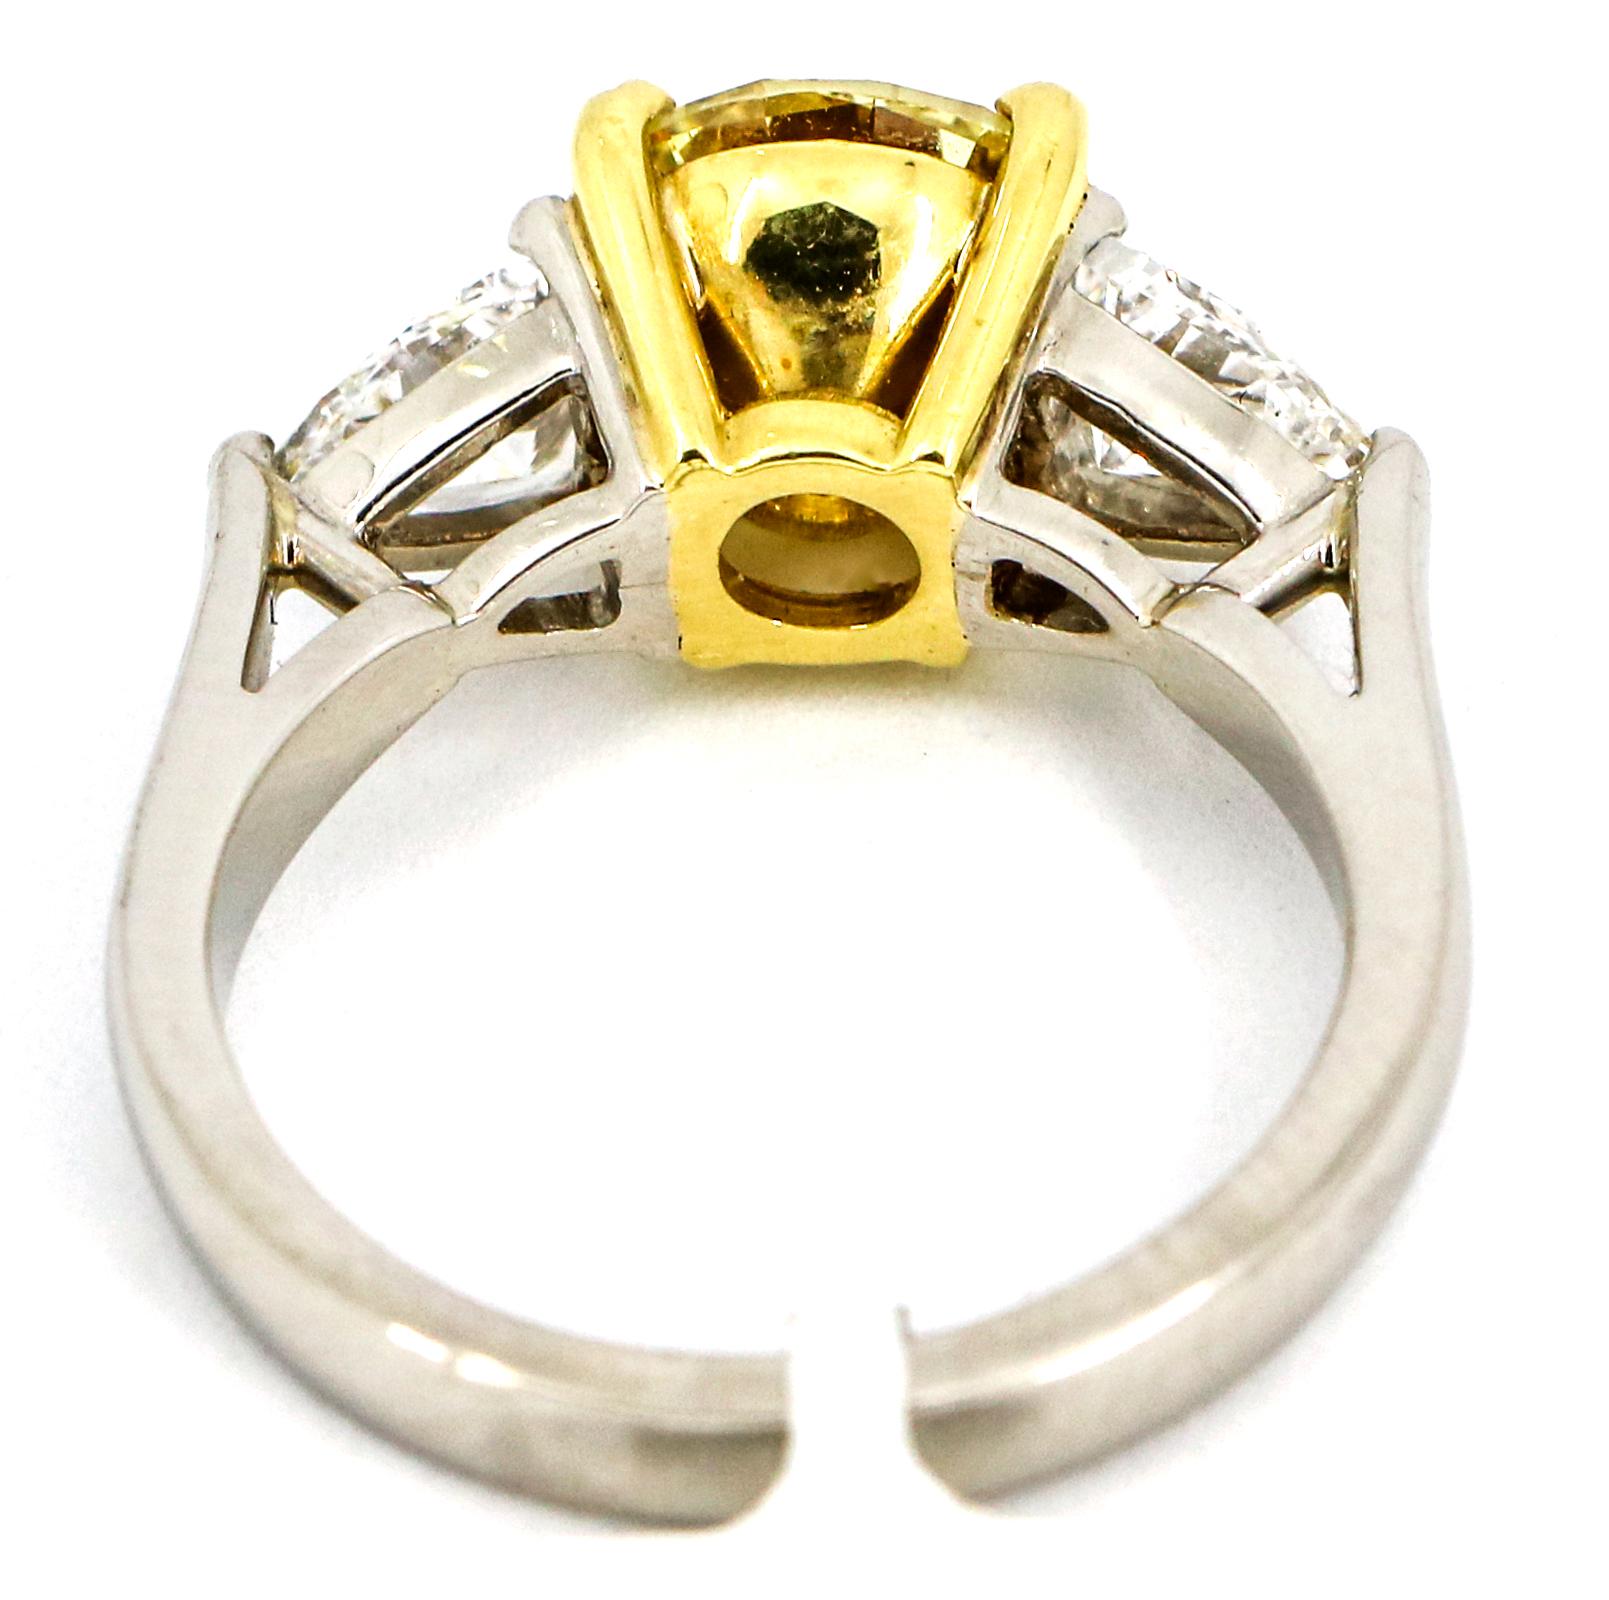 3.05 Carat Platinum GIA Certificate Fancy Yellow Diamond Engagement Ring For Sale 2